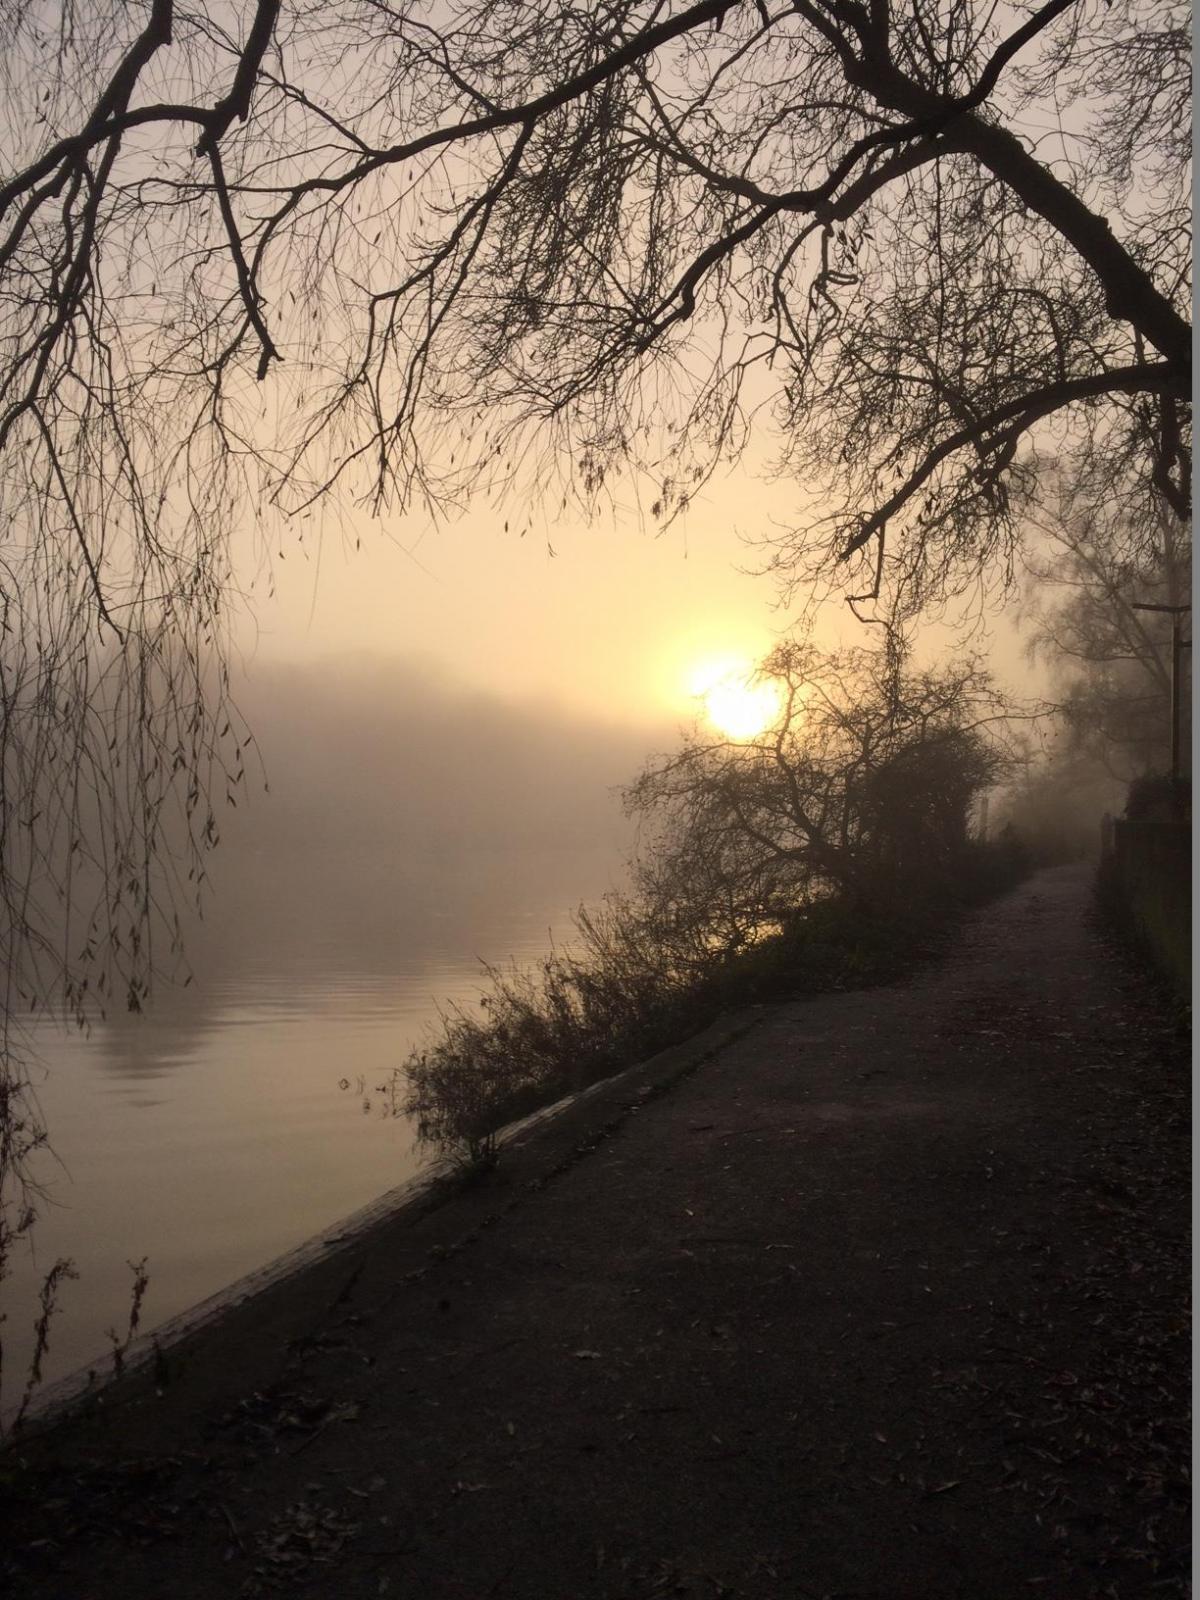 Francesca Buchanan sent in this view of the Thames